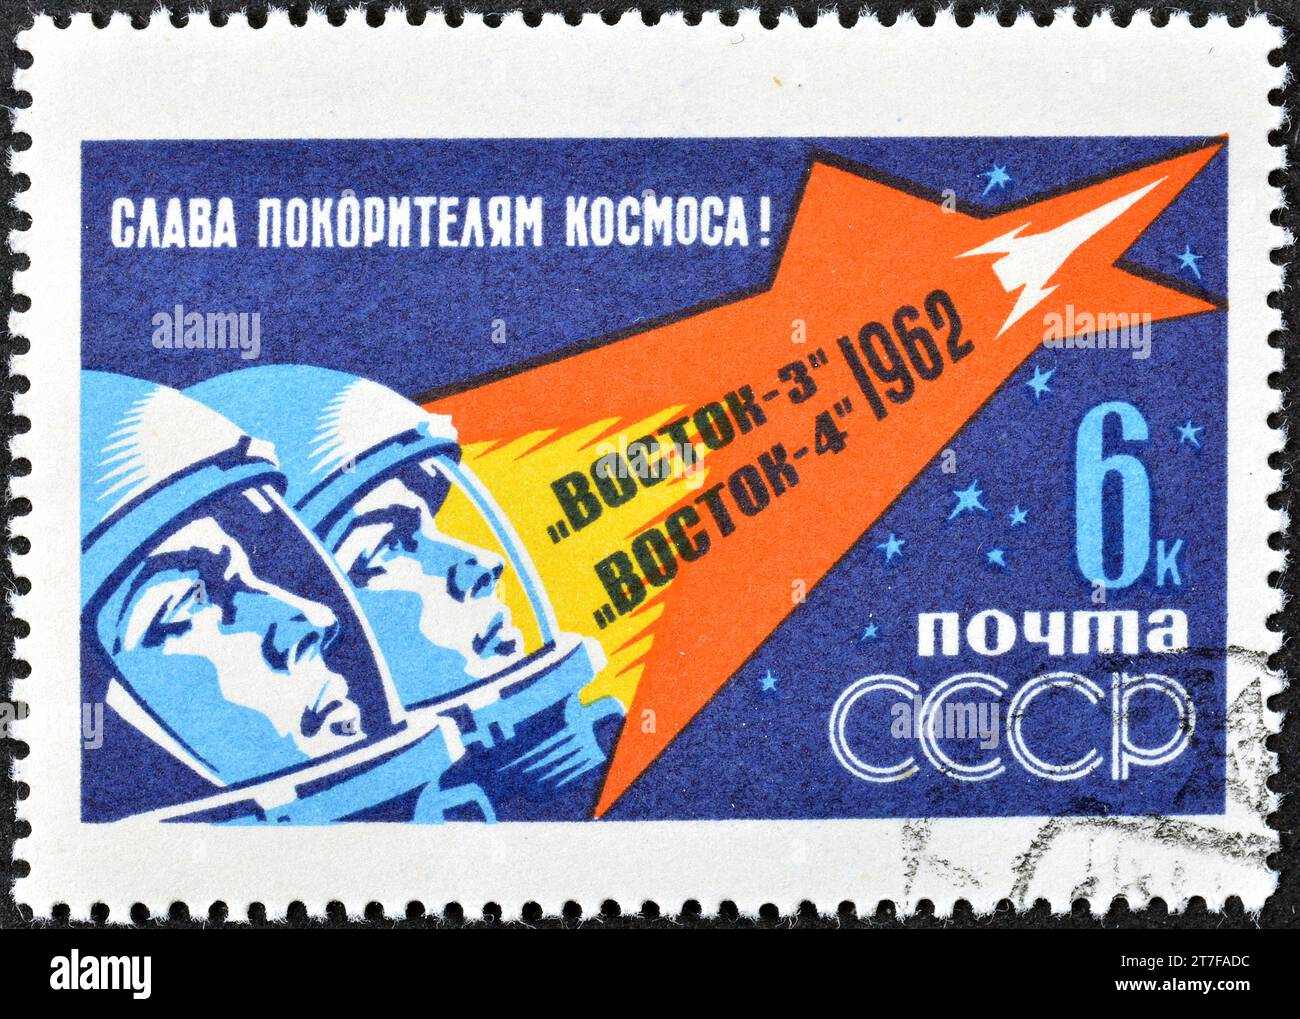 Cancelled postage stamp printed by Soviet Union, that shows Cosmonauts in Flight - 'Glory to the Conquerors of Space', Stock Photo